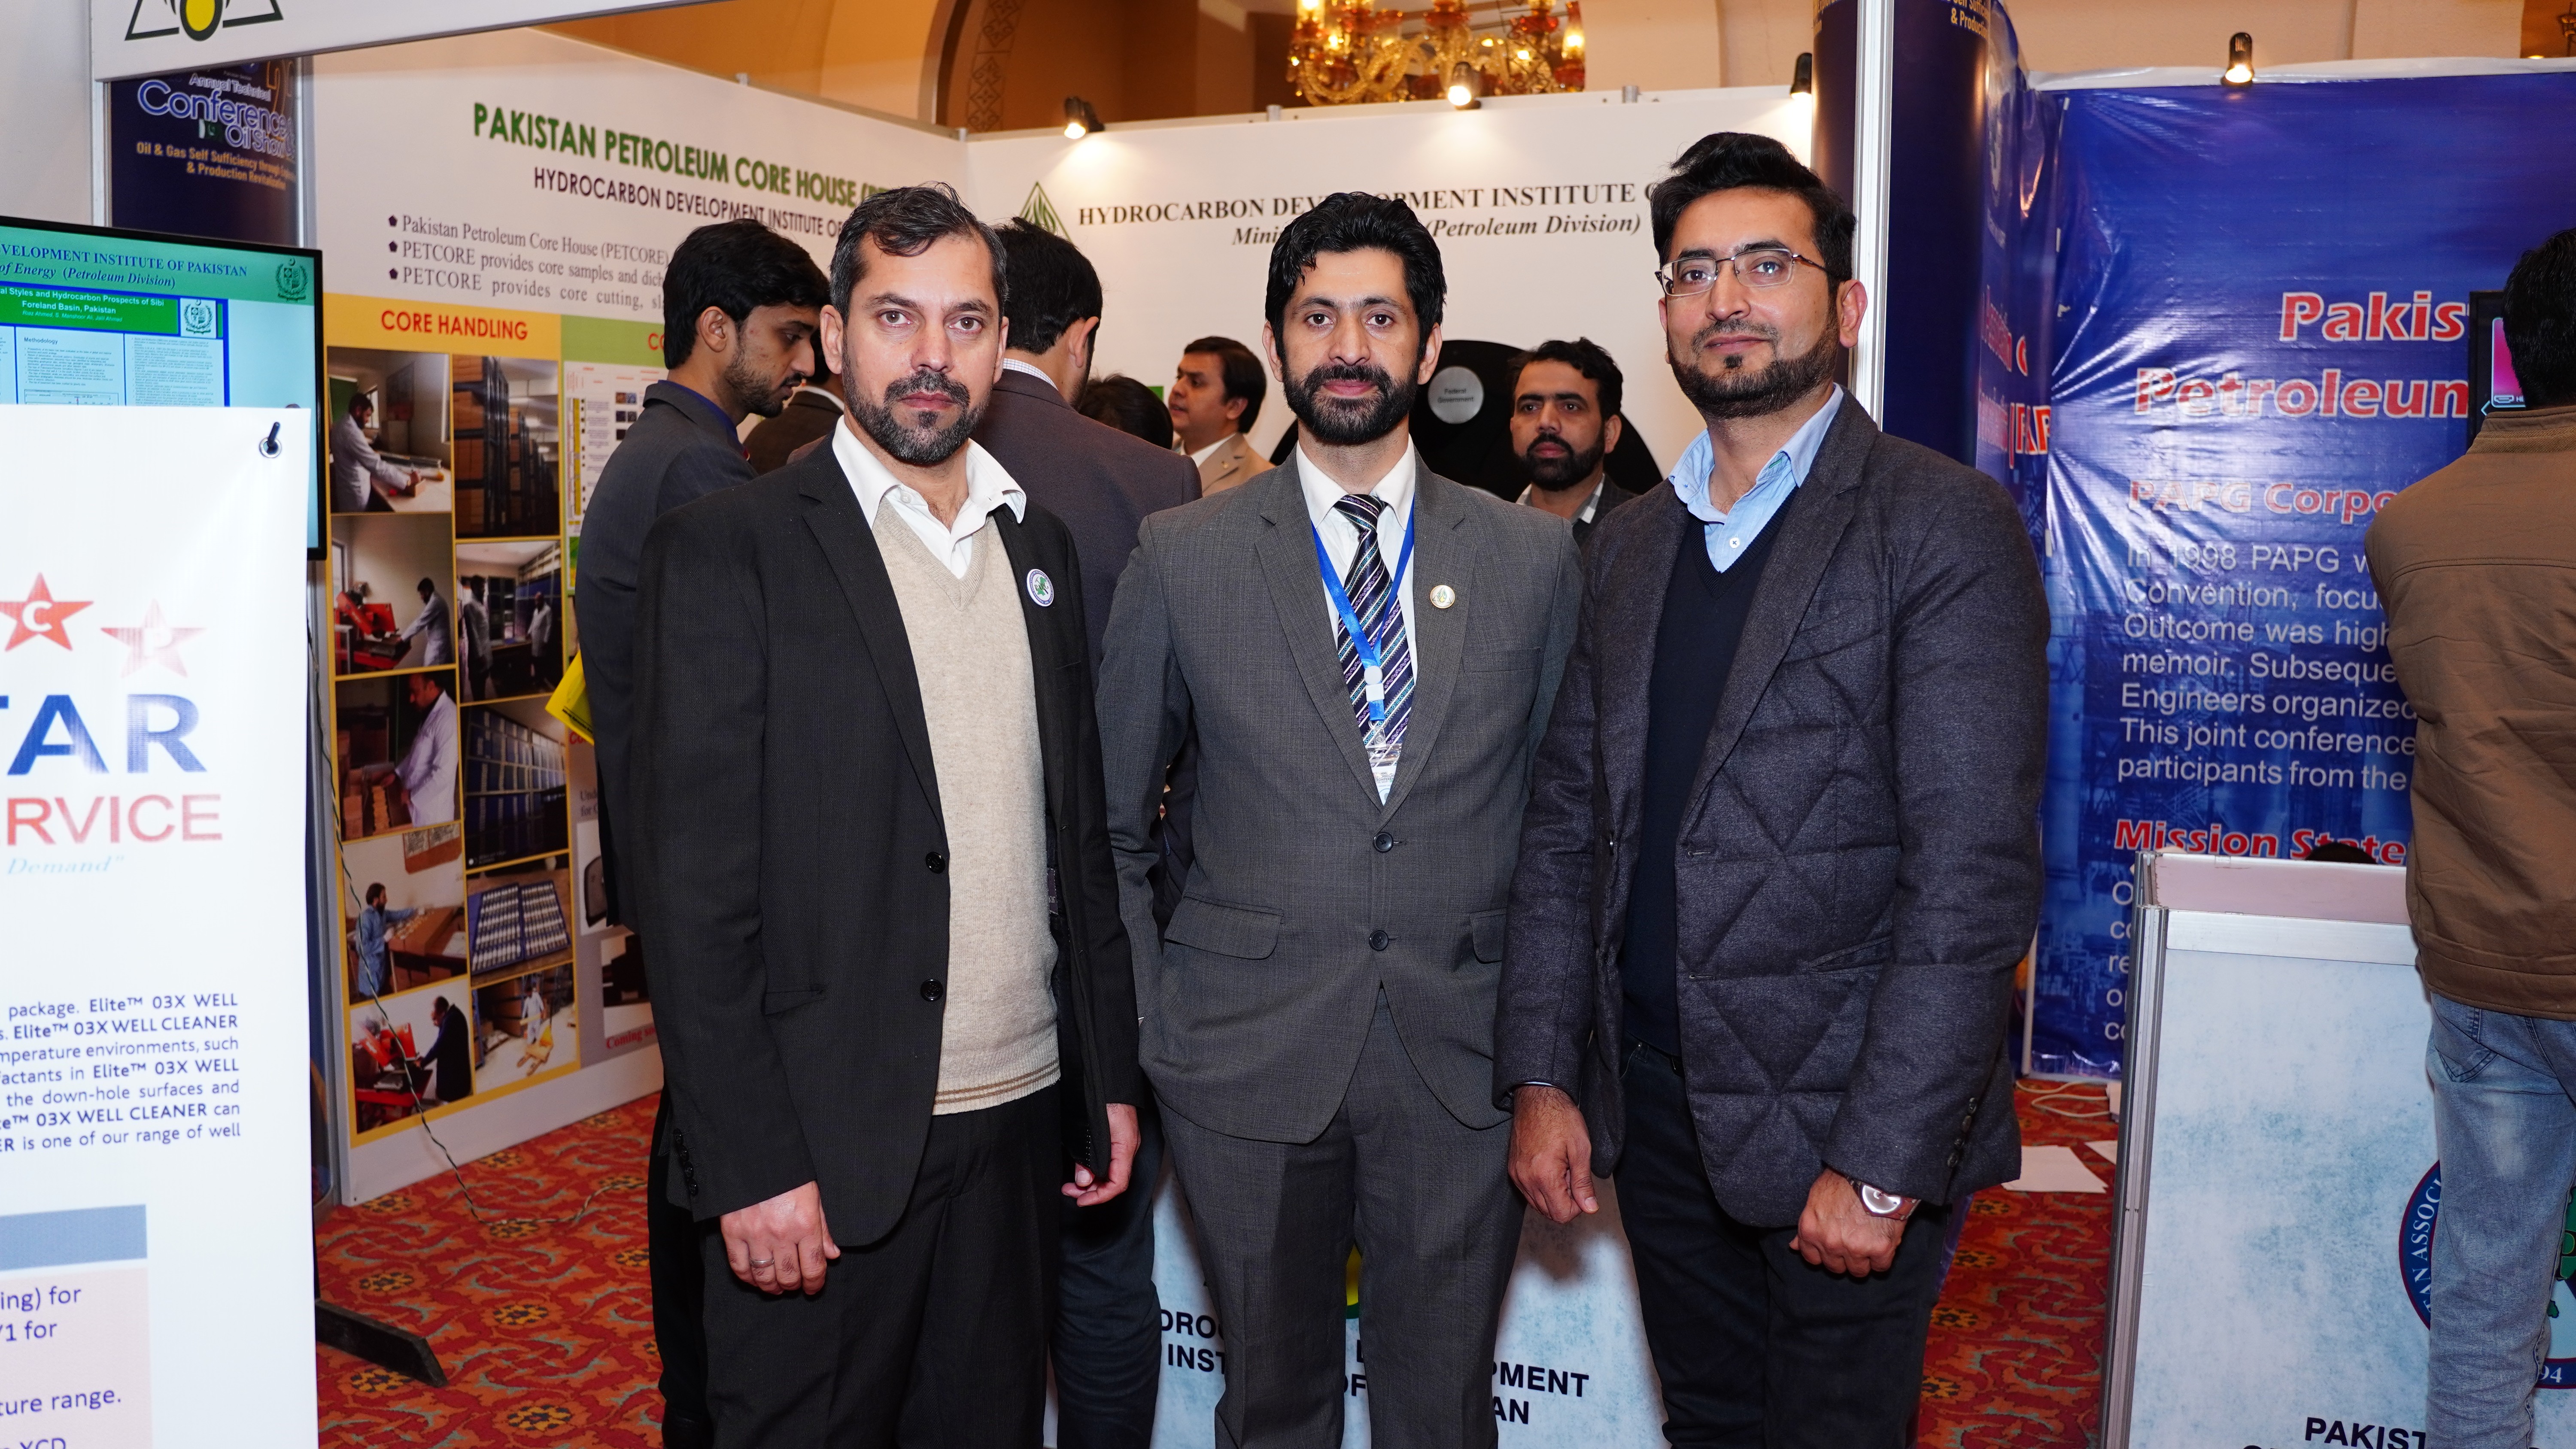 The representers of The Hydrocarbon Development Institute of Pakistan (HDIP)